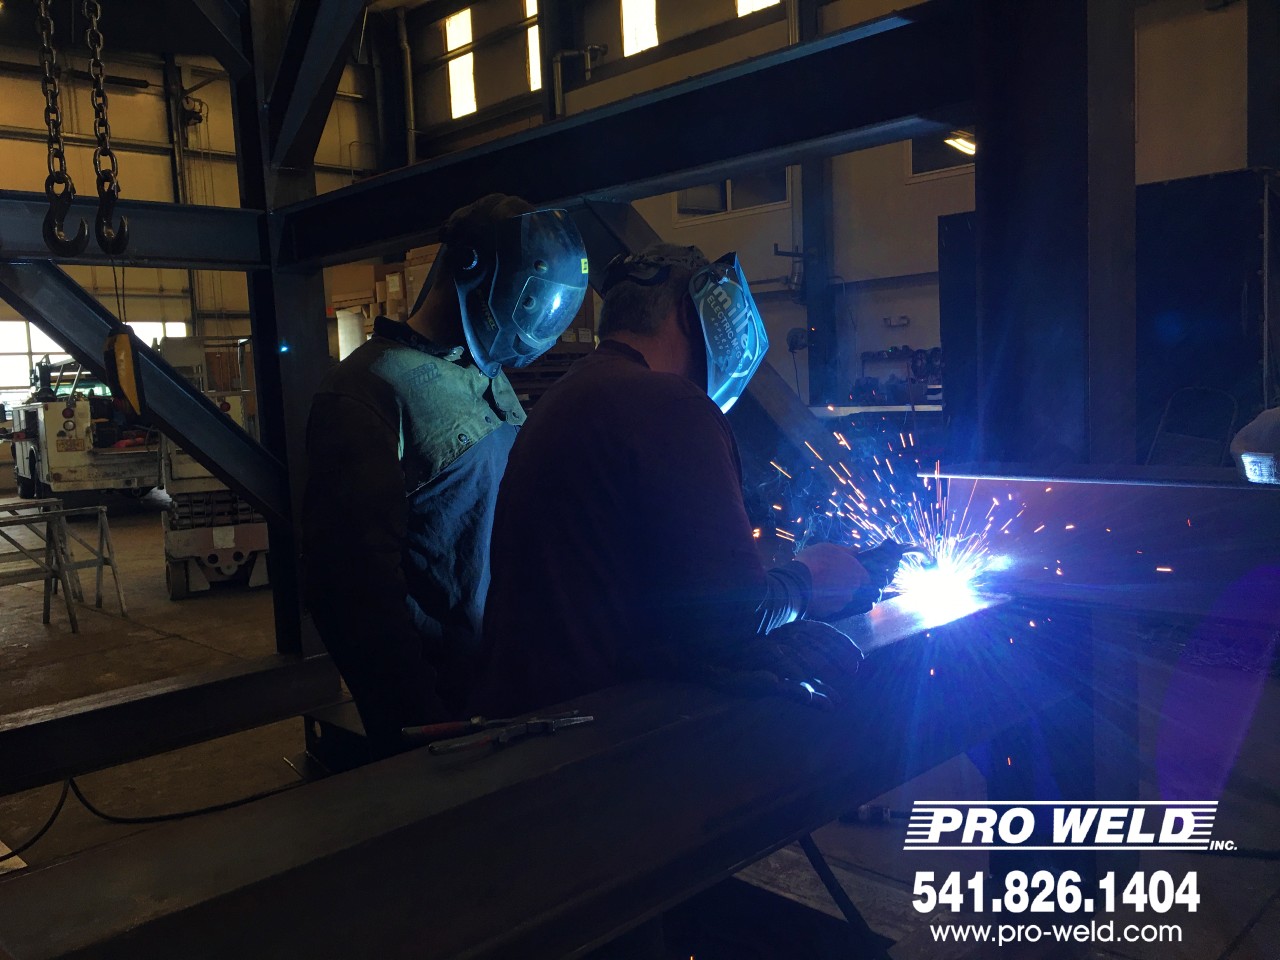 Pro Weld Inc Welding Facilitys Promising View Of Markets